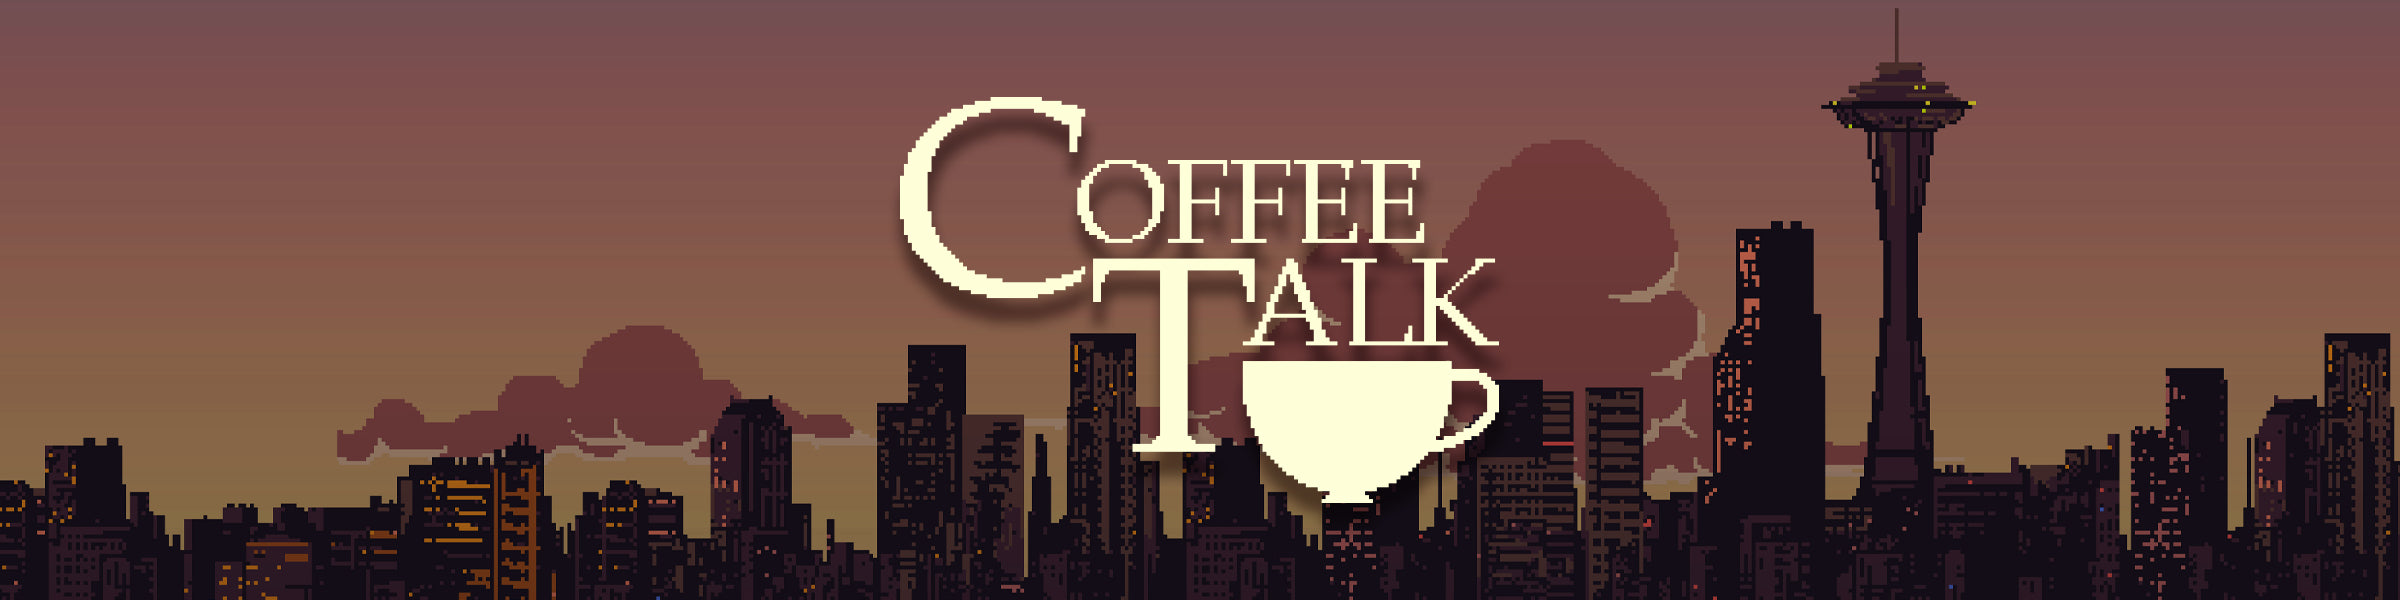 The Officially Licensed Coffee Talk Collection